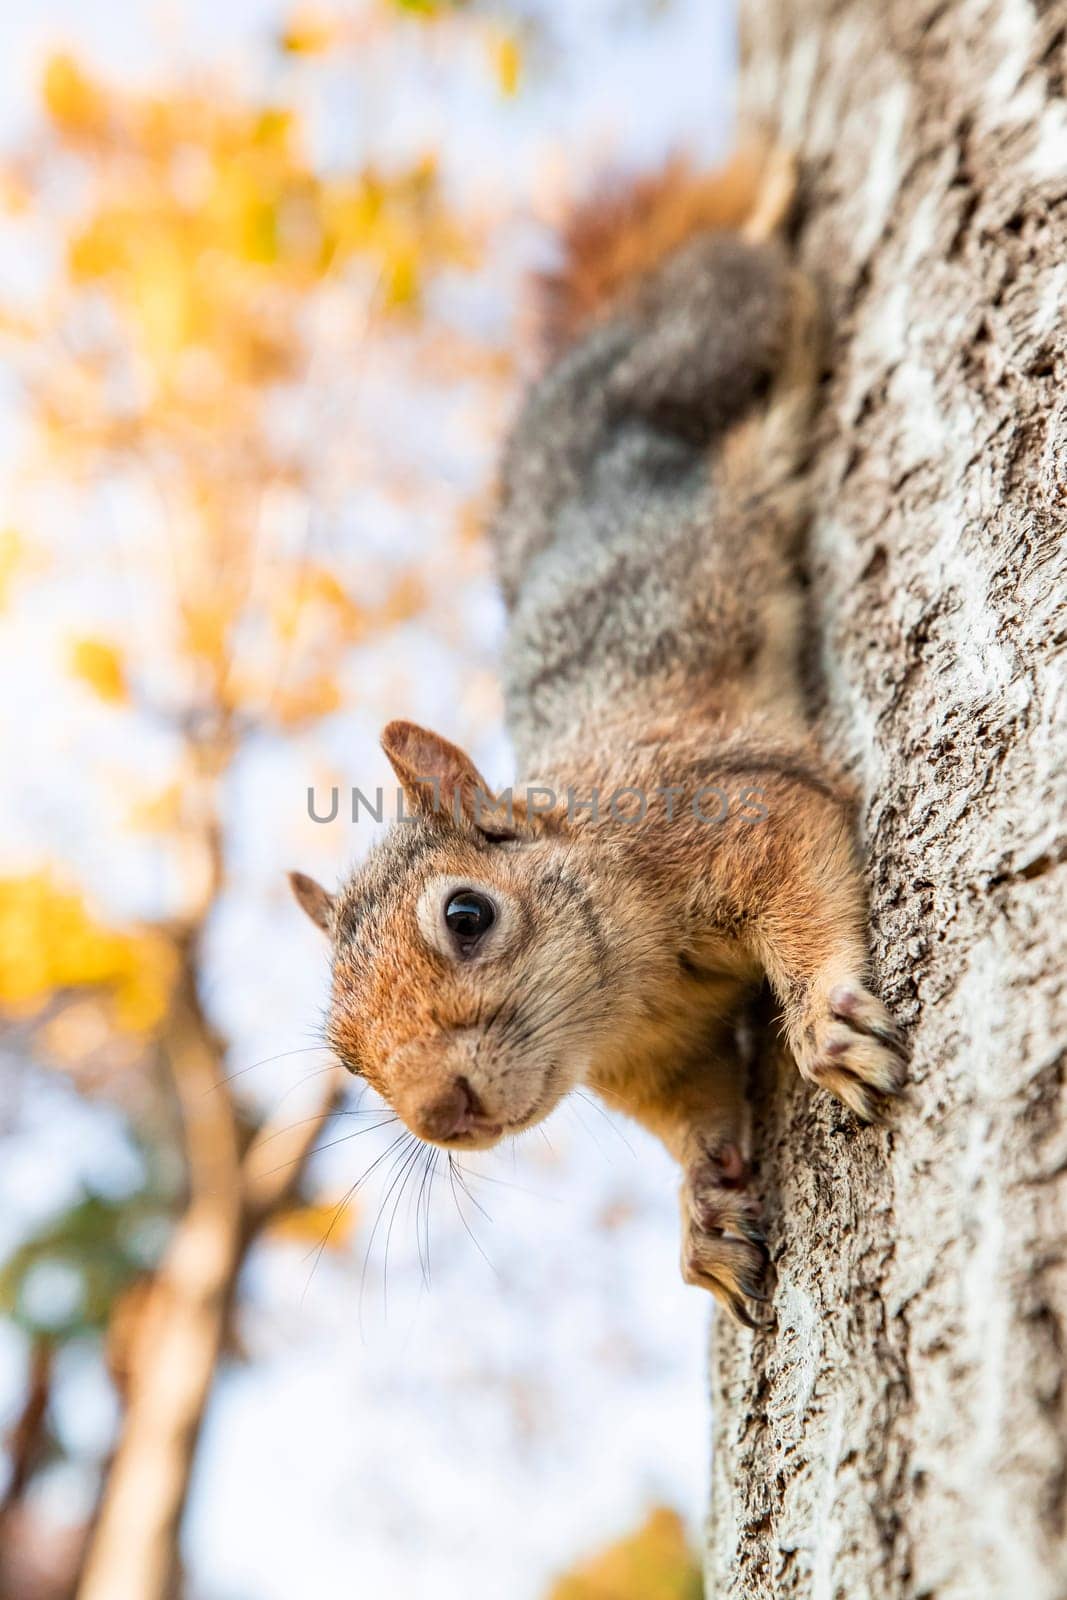 Portrait of fox squirrel (Sciurus niger) sitting on branch isolated on green. Holds foreleg with nut on chest. Urban wildlife. by emirkoo